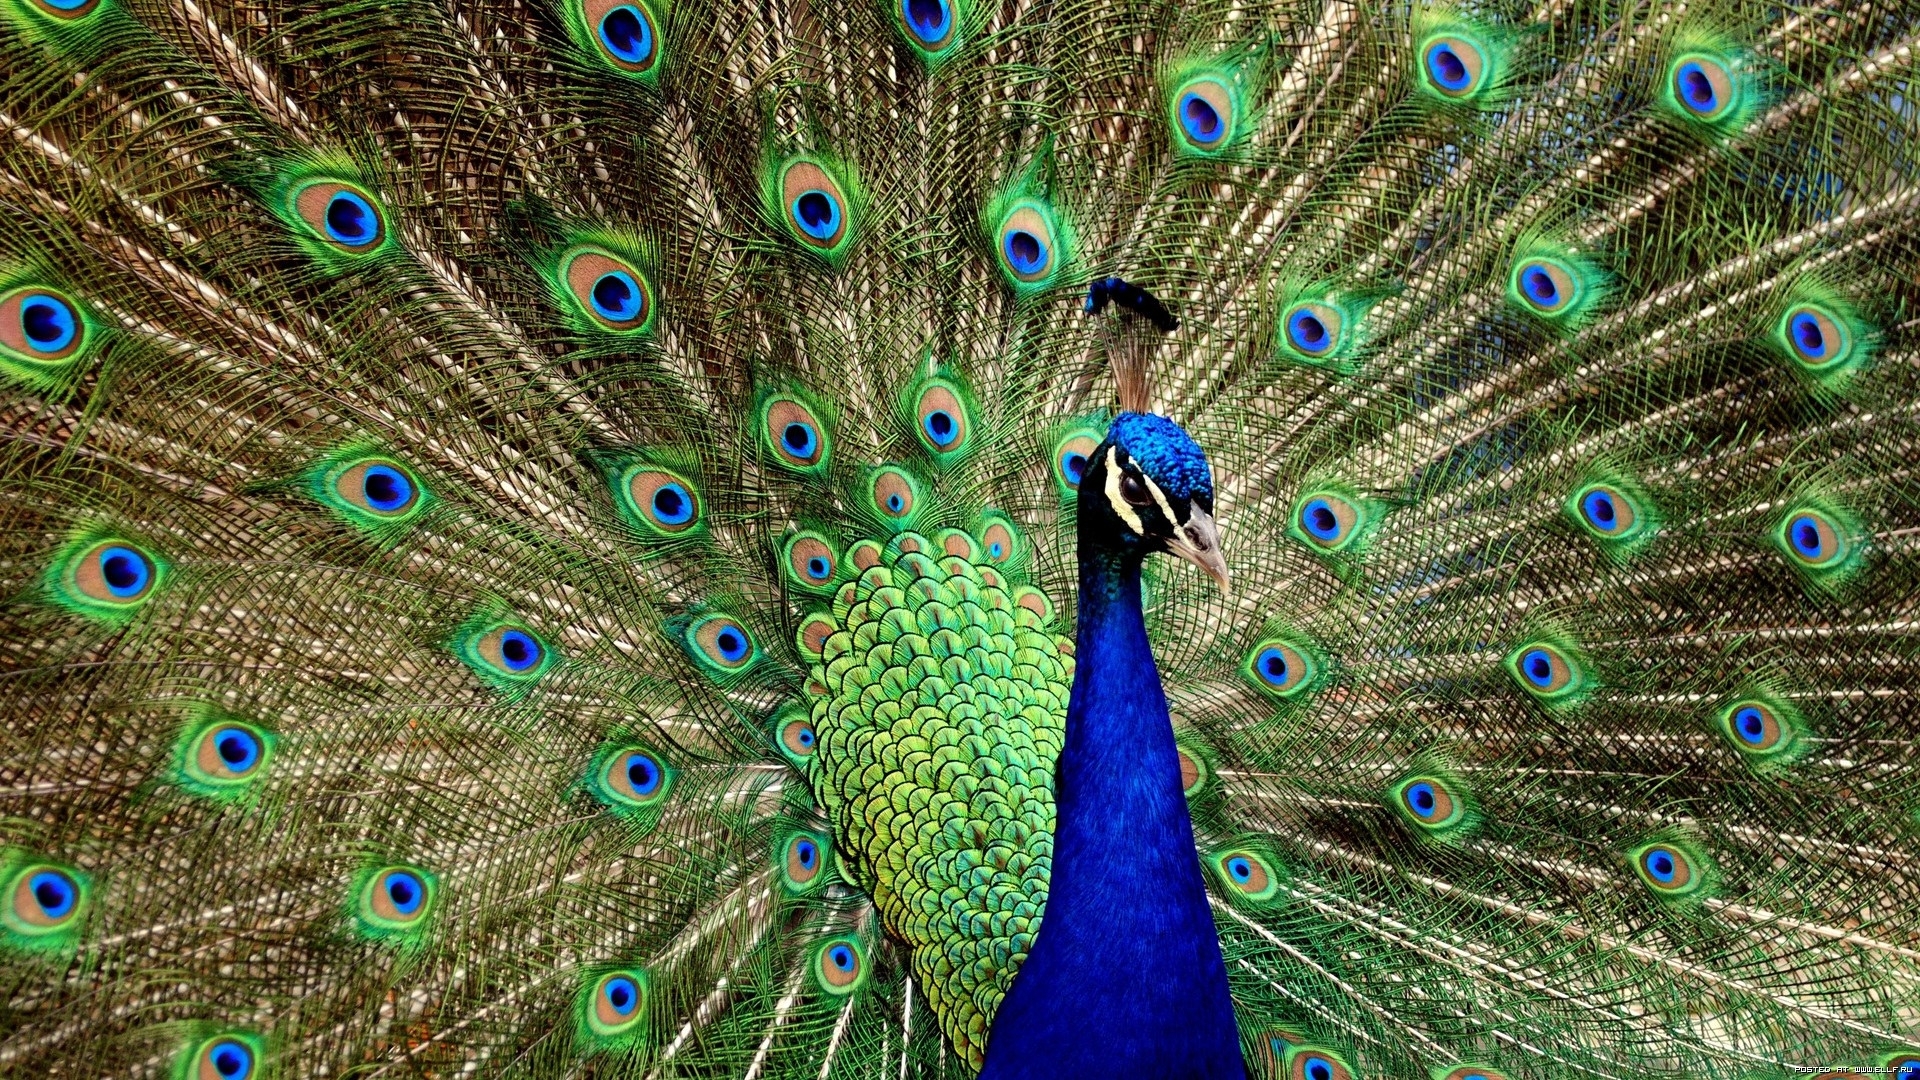 Mobile wallpaper: Peacocks, Animals, Birds, 49688 download the picture for  free.